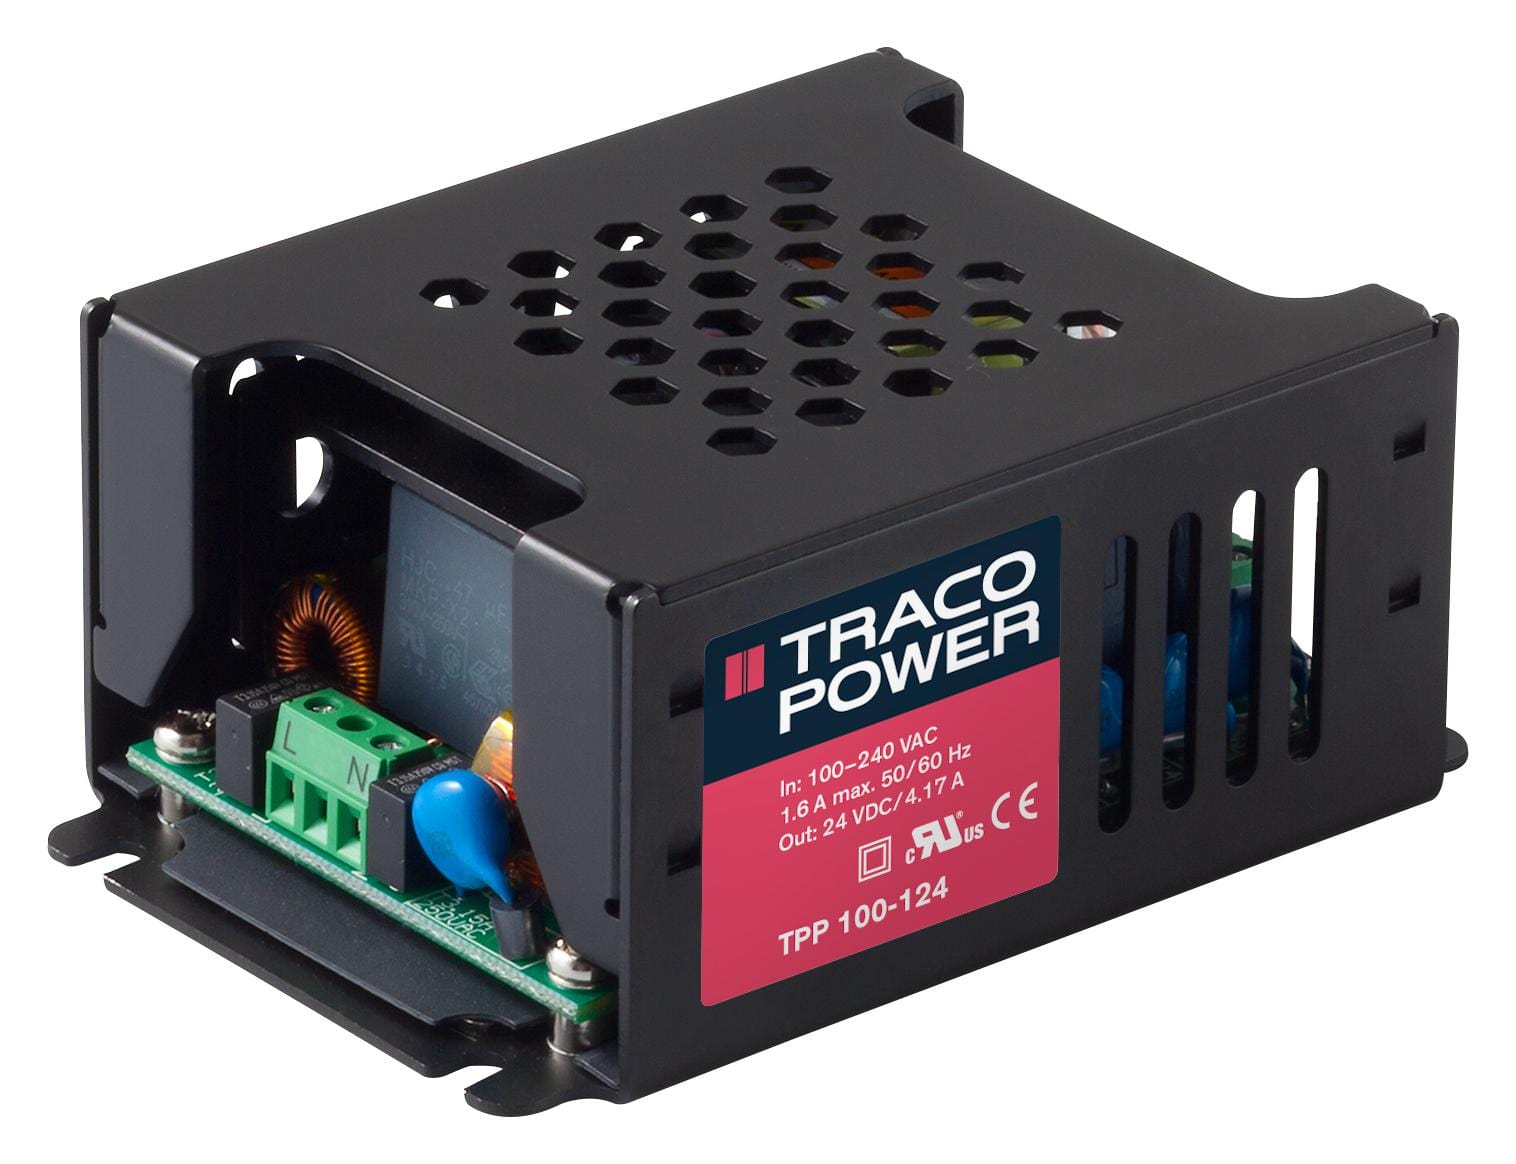 TRACO POWER Enclosed - Single Output TPP 100-124 POWER SUPPLY, AC-DC, MEDICAL, 24V, 4.17A TRACO POWER 2414303 TPP 100-124